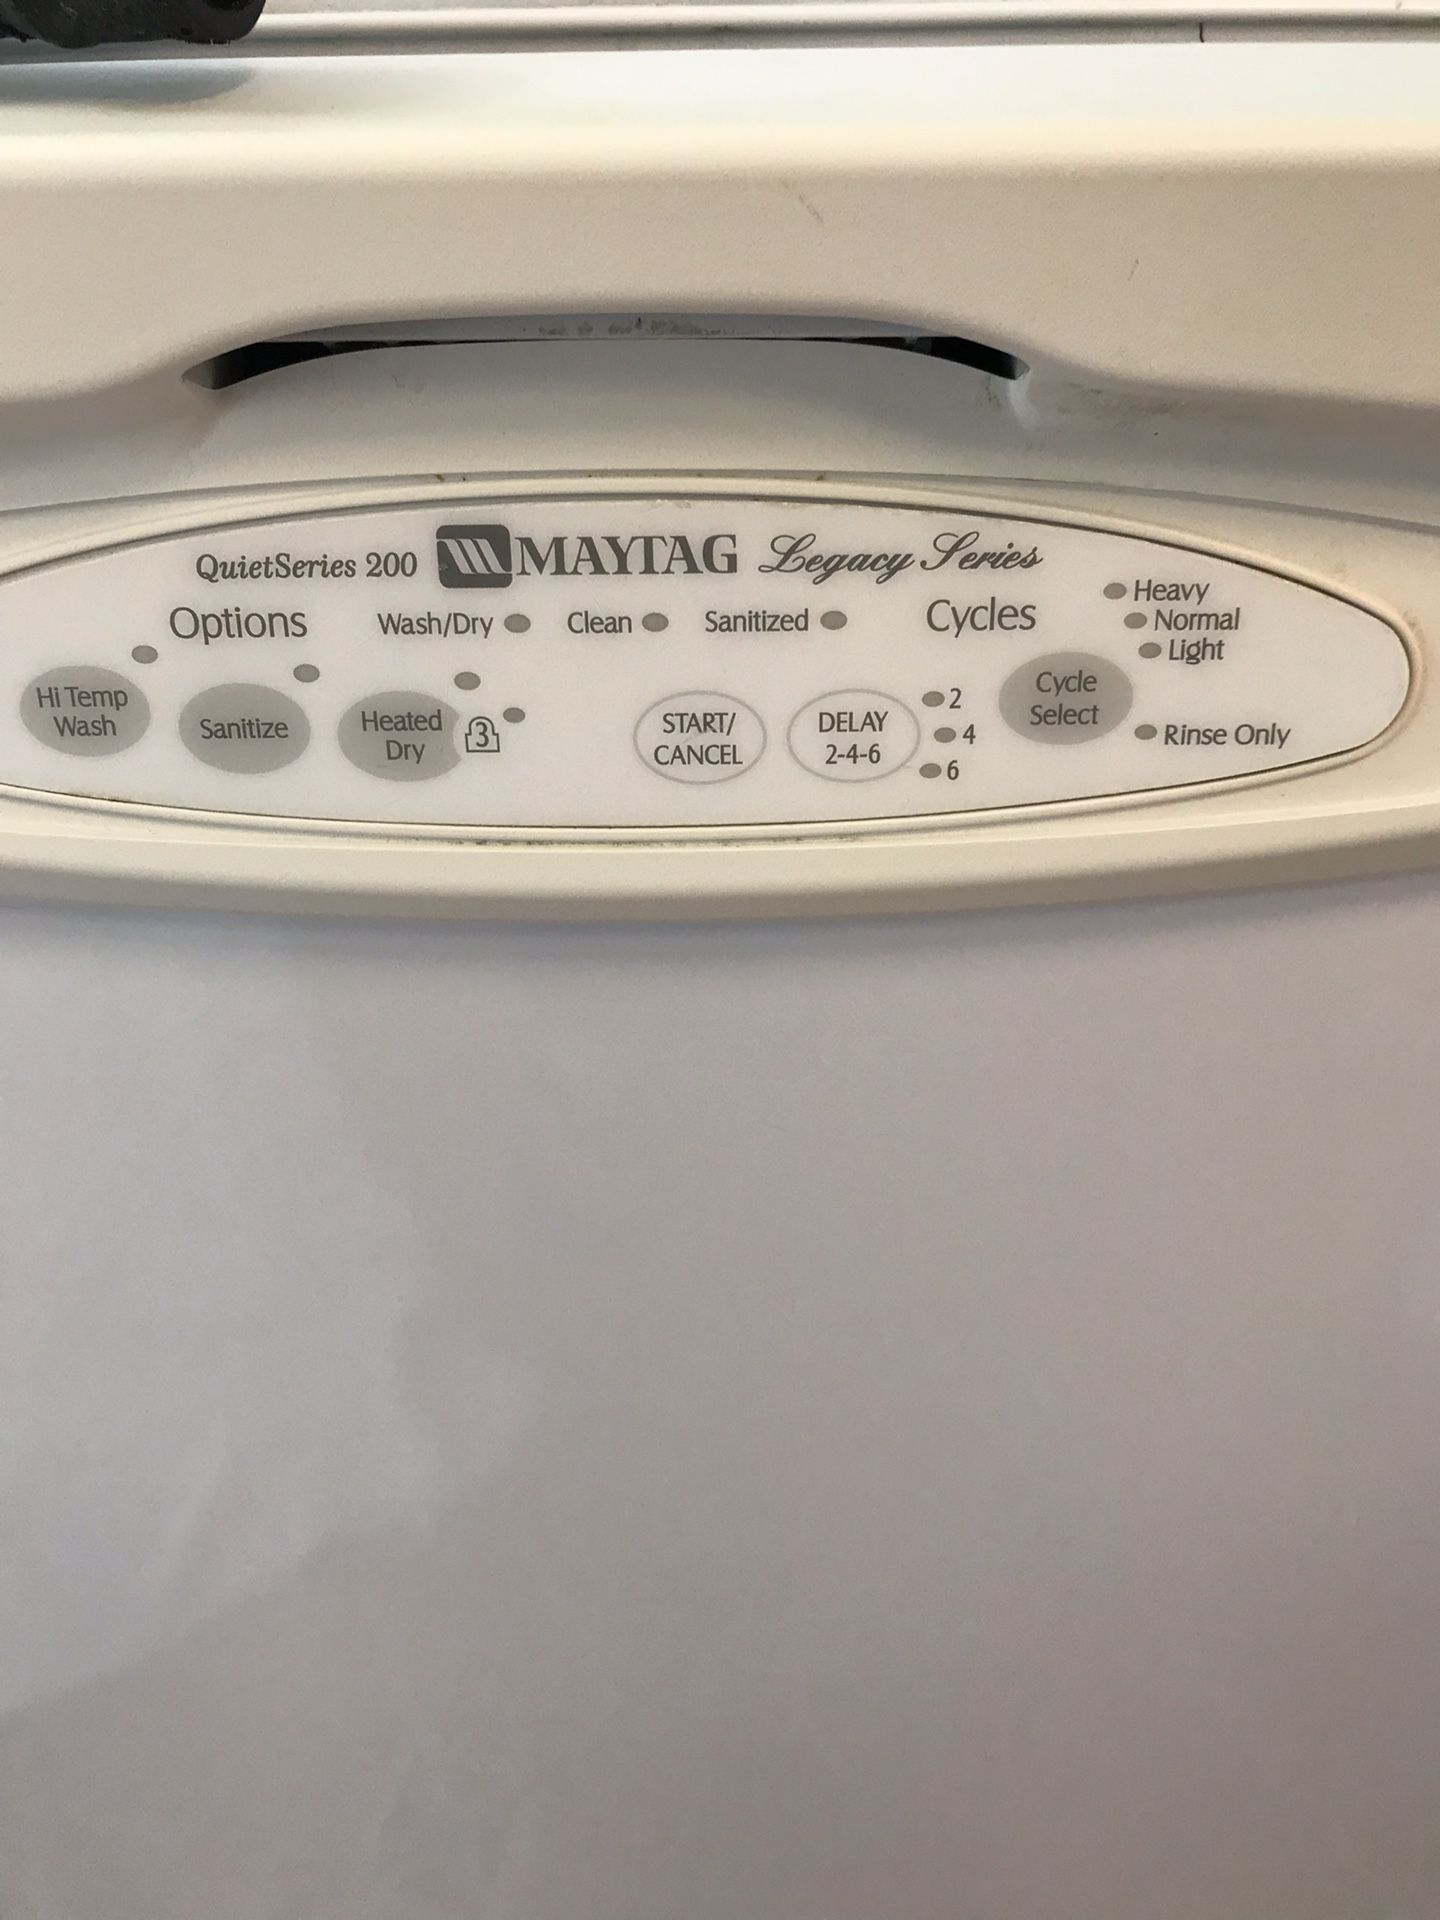 Maytag dishwasher runs great just bought new kitchen appliances